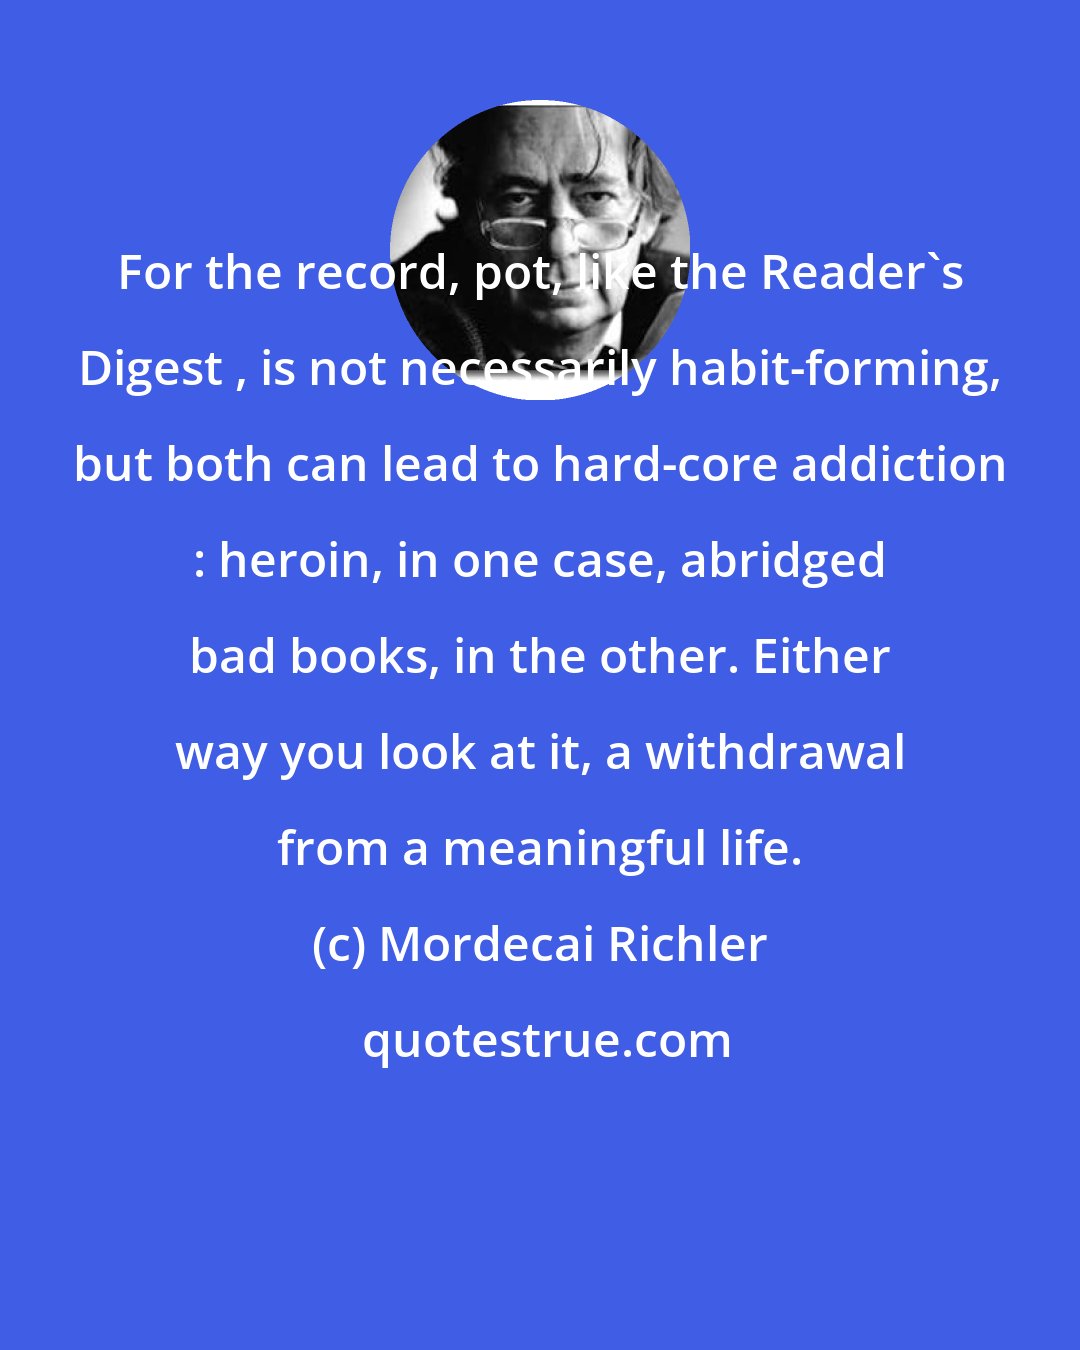 Mordecai Richler: For the record, pot, like the Reader's Digest , is not necessarily habit-forming, but both can lead to hard-core addiction : heroin, in one case, abridged bad books, in the other. Either way you look at it, a withdrawal from a meaningful life.